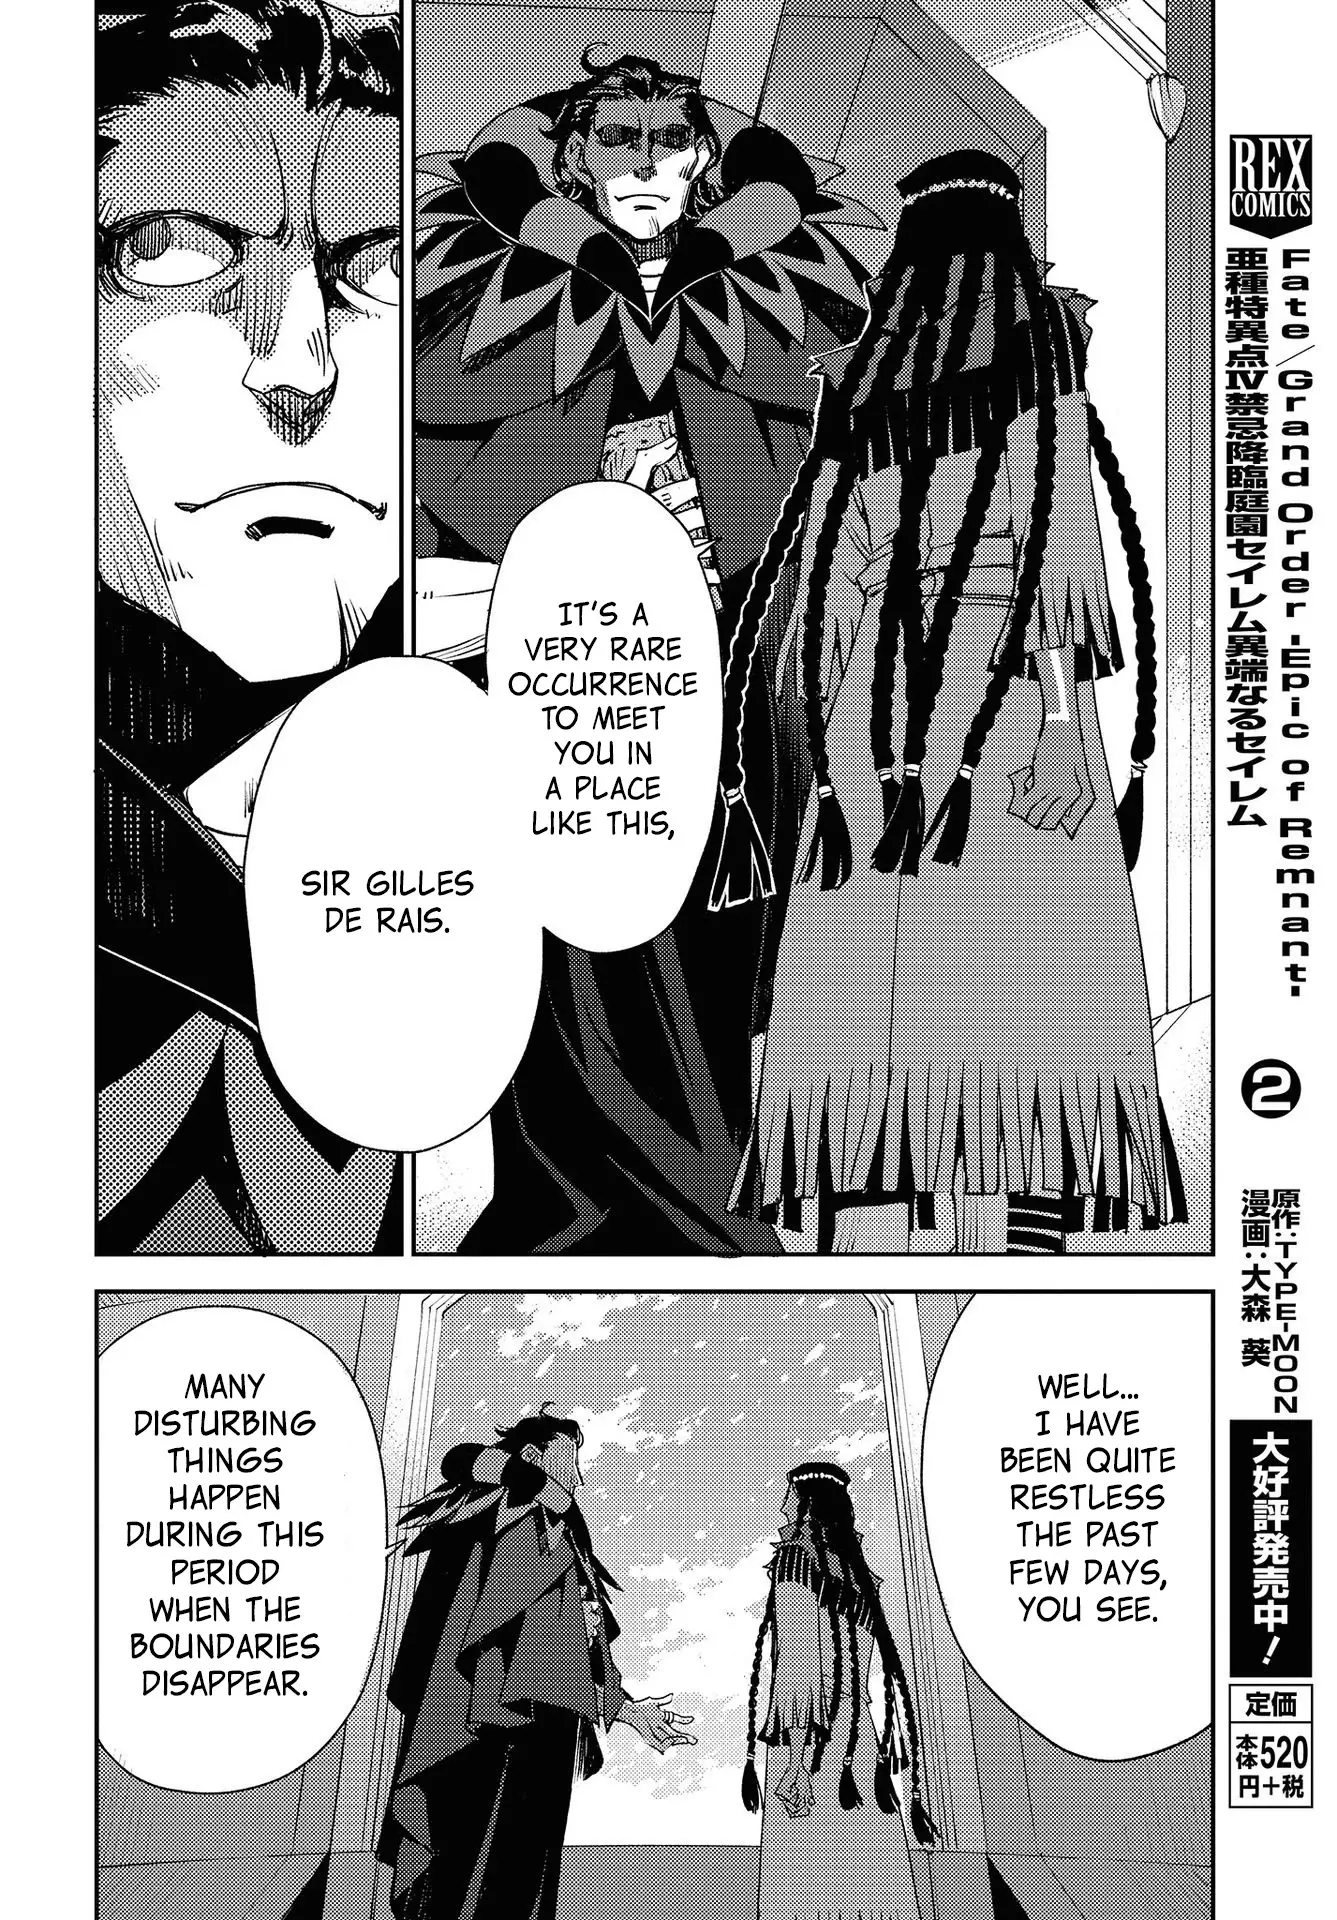 Fate/grand Order: Epic Of Remnant - Subspecies Singularity Iv: Taboo Advent Salem: Salem Of Heresy - 17 page 6